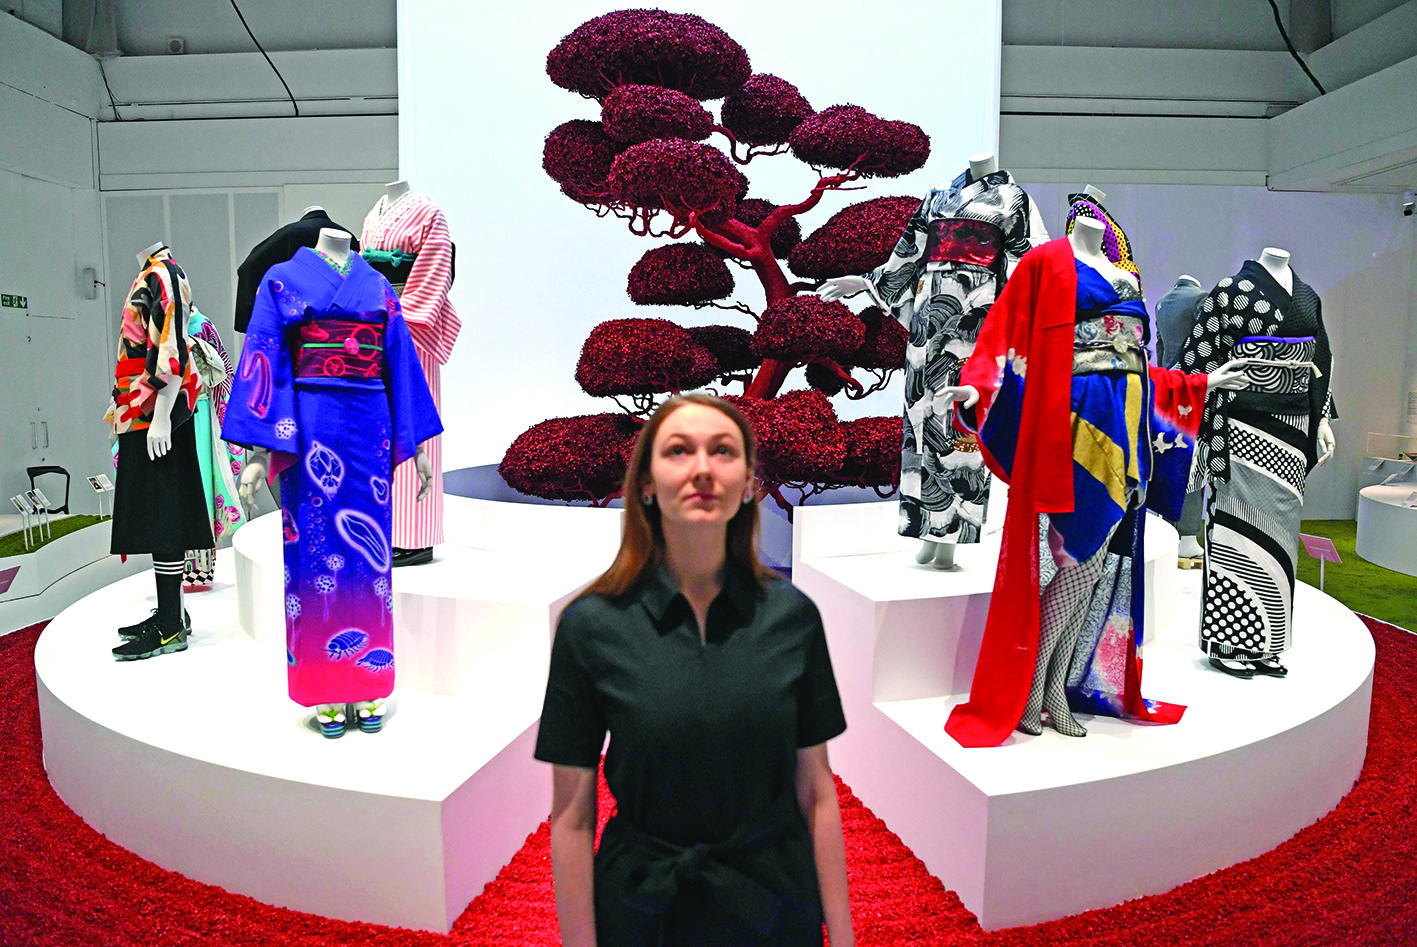 A museum employee poses next to kimonos displayed during the press preview of the 'Kimono: Kyoto to Catwalk' exhibition at the Victoria and Albert Museum in central London on February 26, 2020. (Photo by DANIEL LEAL-OLIVAS / AFP)